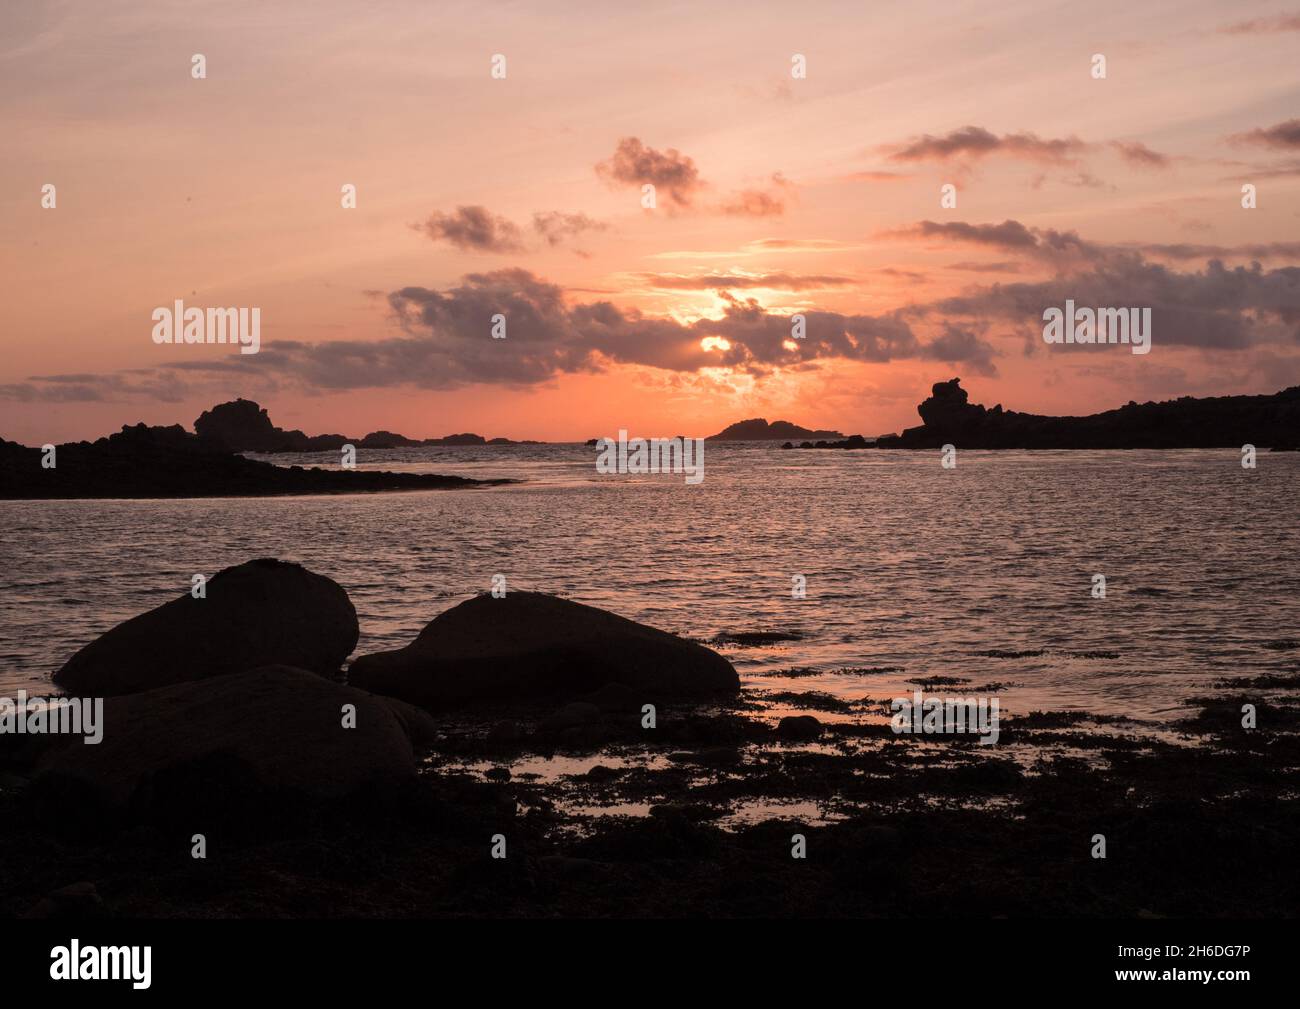 Sun setting over the rocks off Bryher, Isles of Scilly, viewed from Stony Par beach Stock Photo